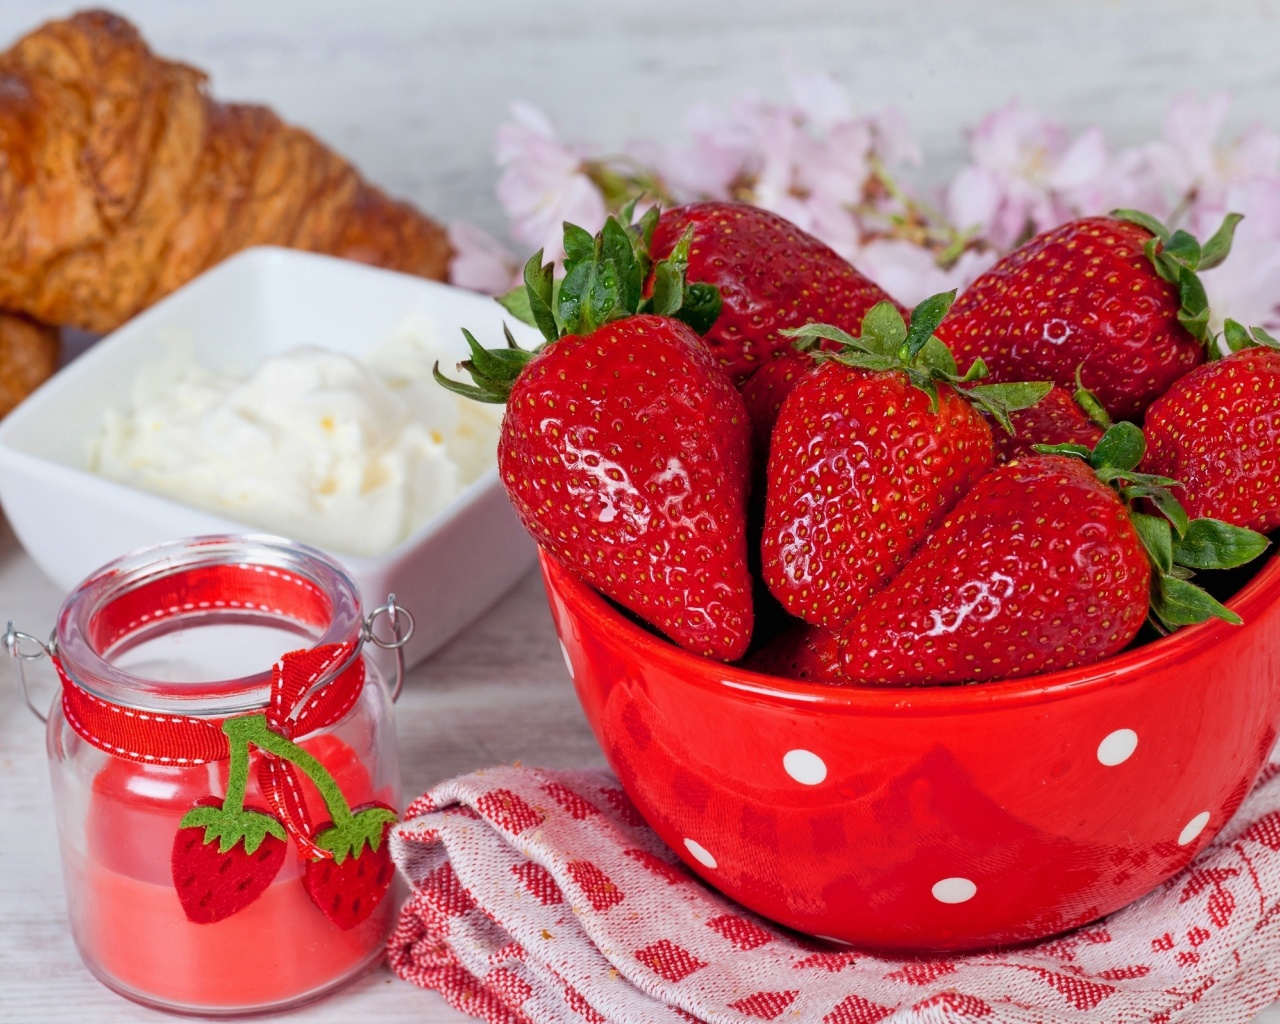 Strawberry and Jam wallpaper 1280x1024